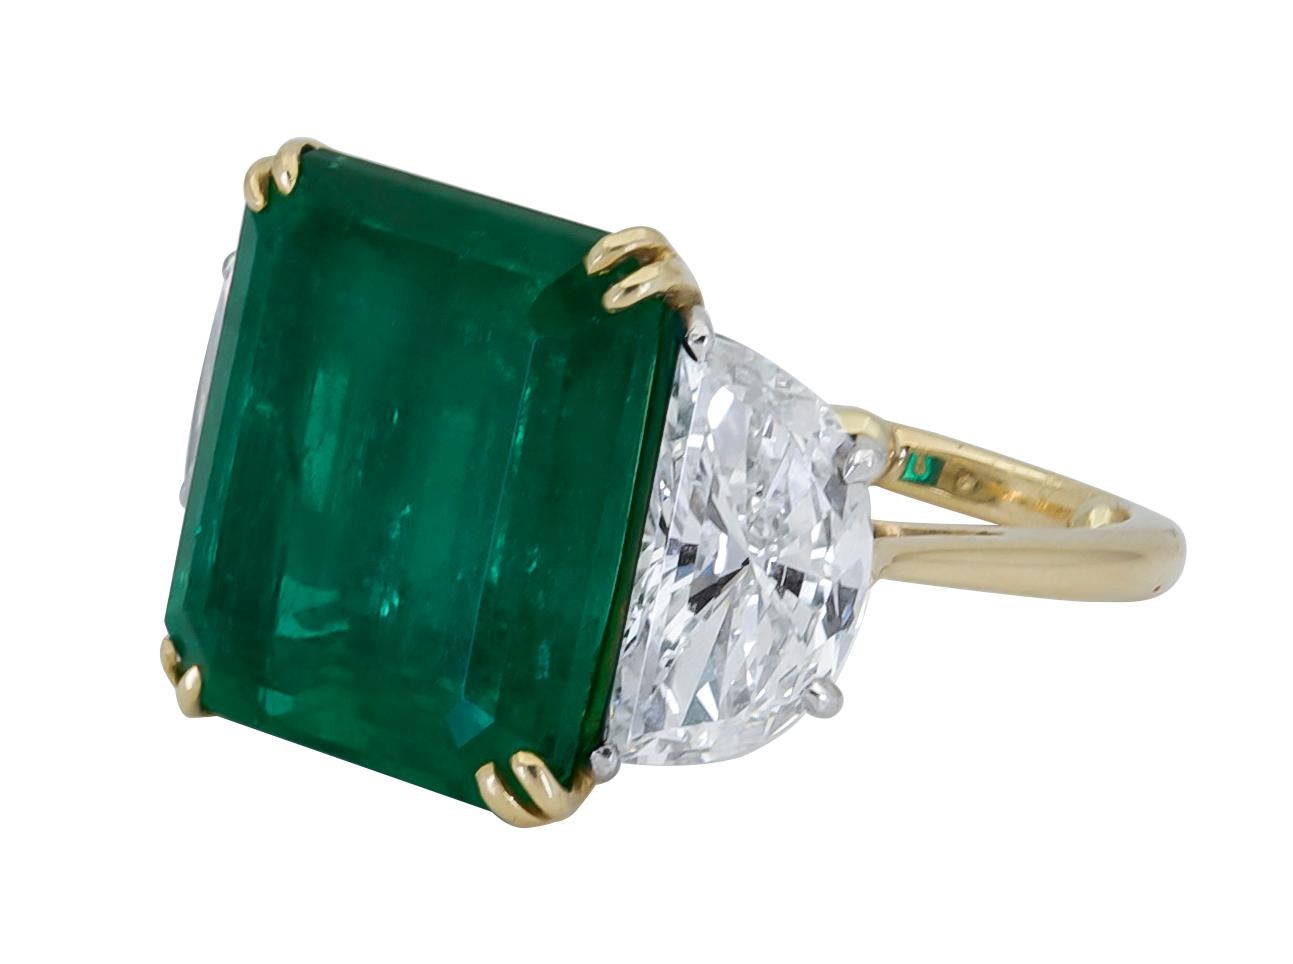 Features a color-rich emerald cut green emerald flanked by two brilliant half-moon diamonds. Set in a delicate and thin 18k yellow gold and platinum mounting.
Green Emerald weighs 11.57 carats and is of Colombian origin.
Size 6 US.
Dimensions: 1.39